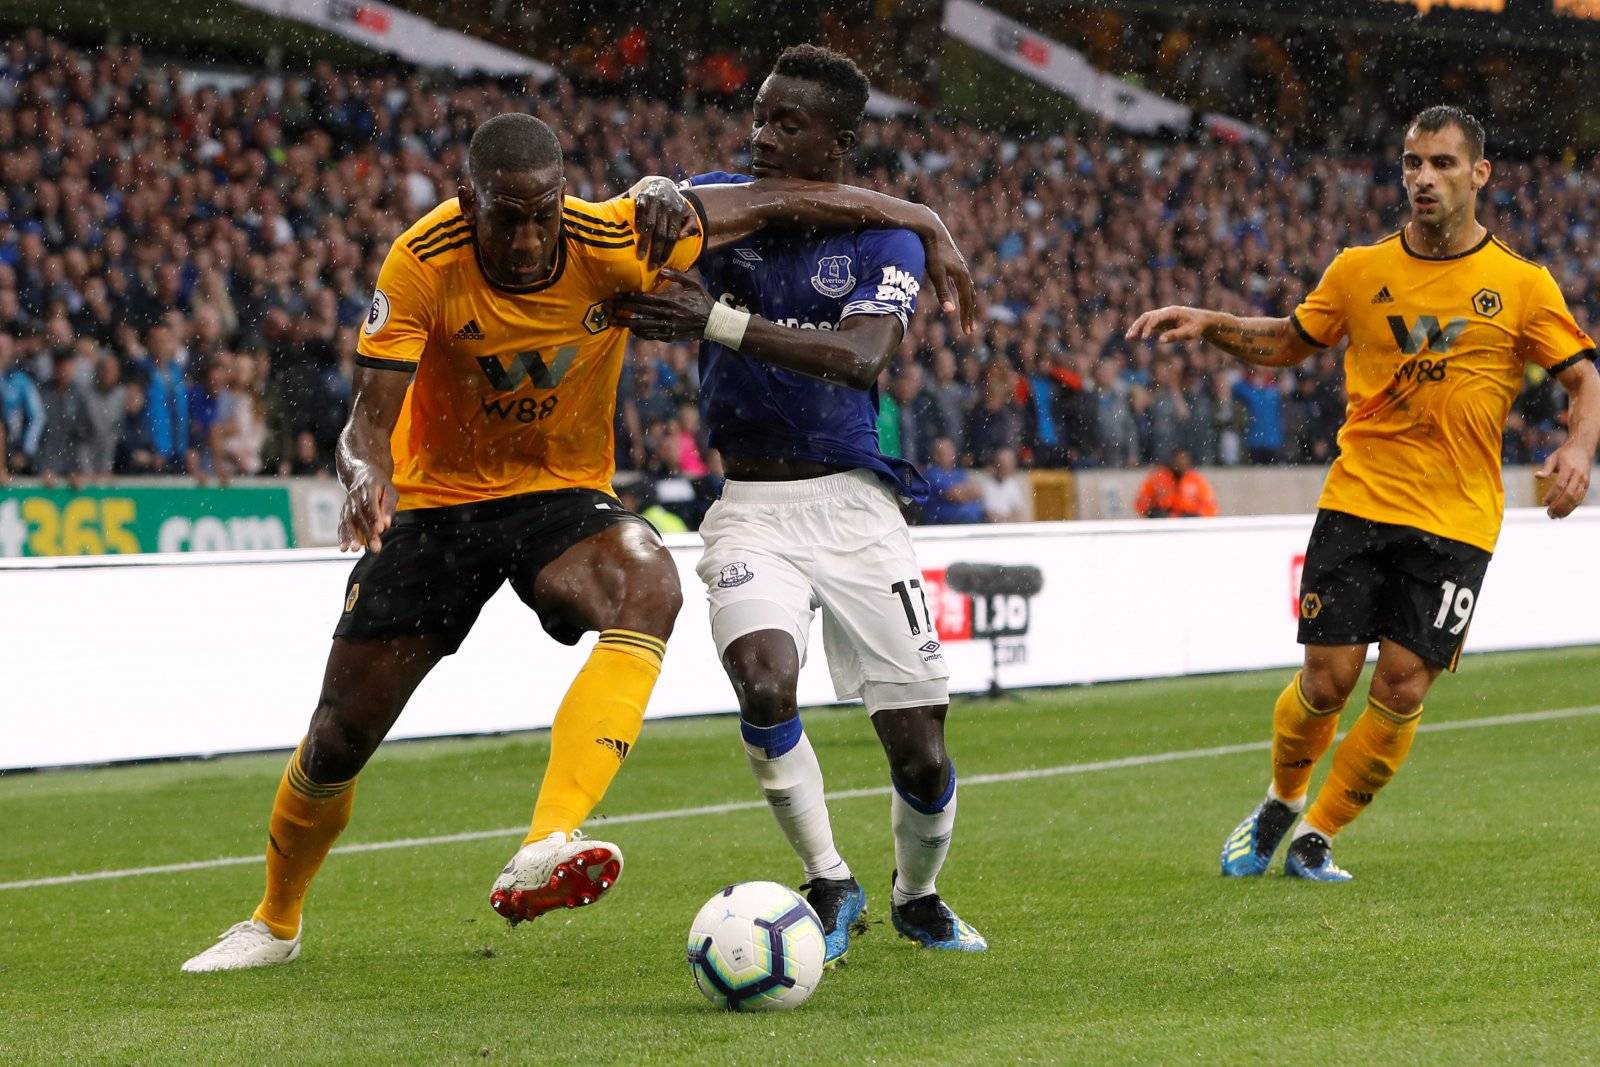 Forget signings: Keeping Idrissa Gueye would represent a great window for Everton - Everton